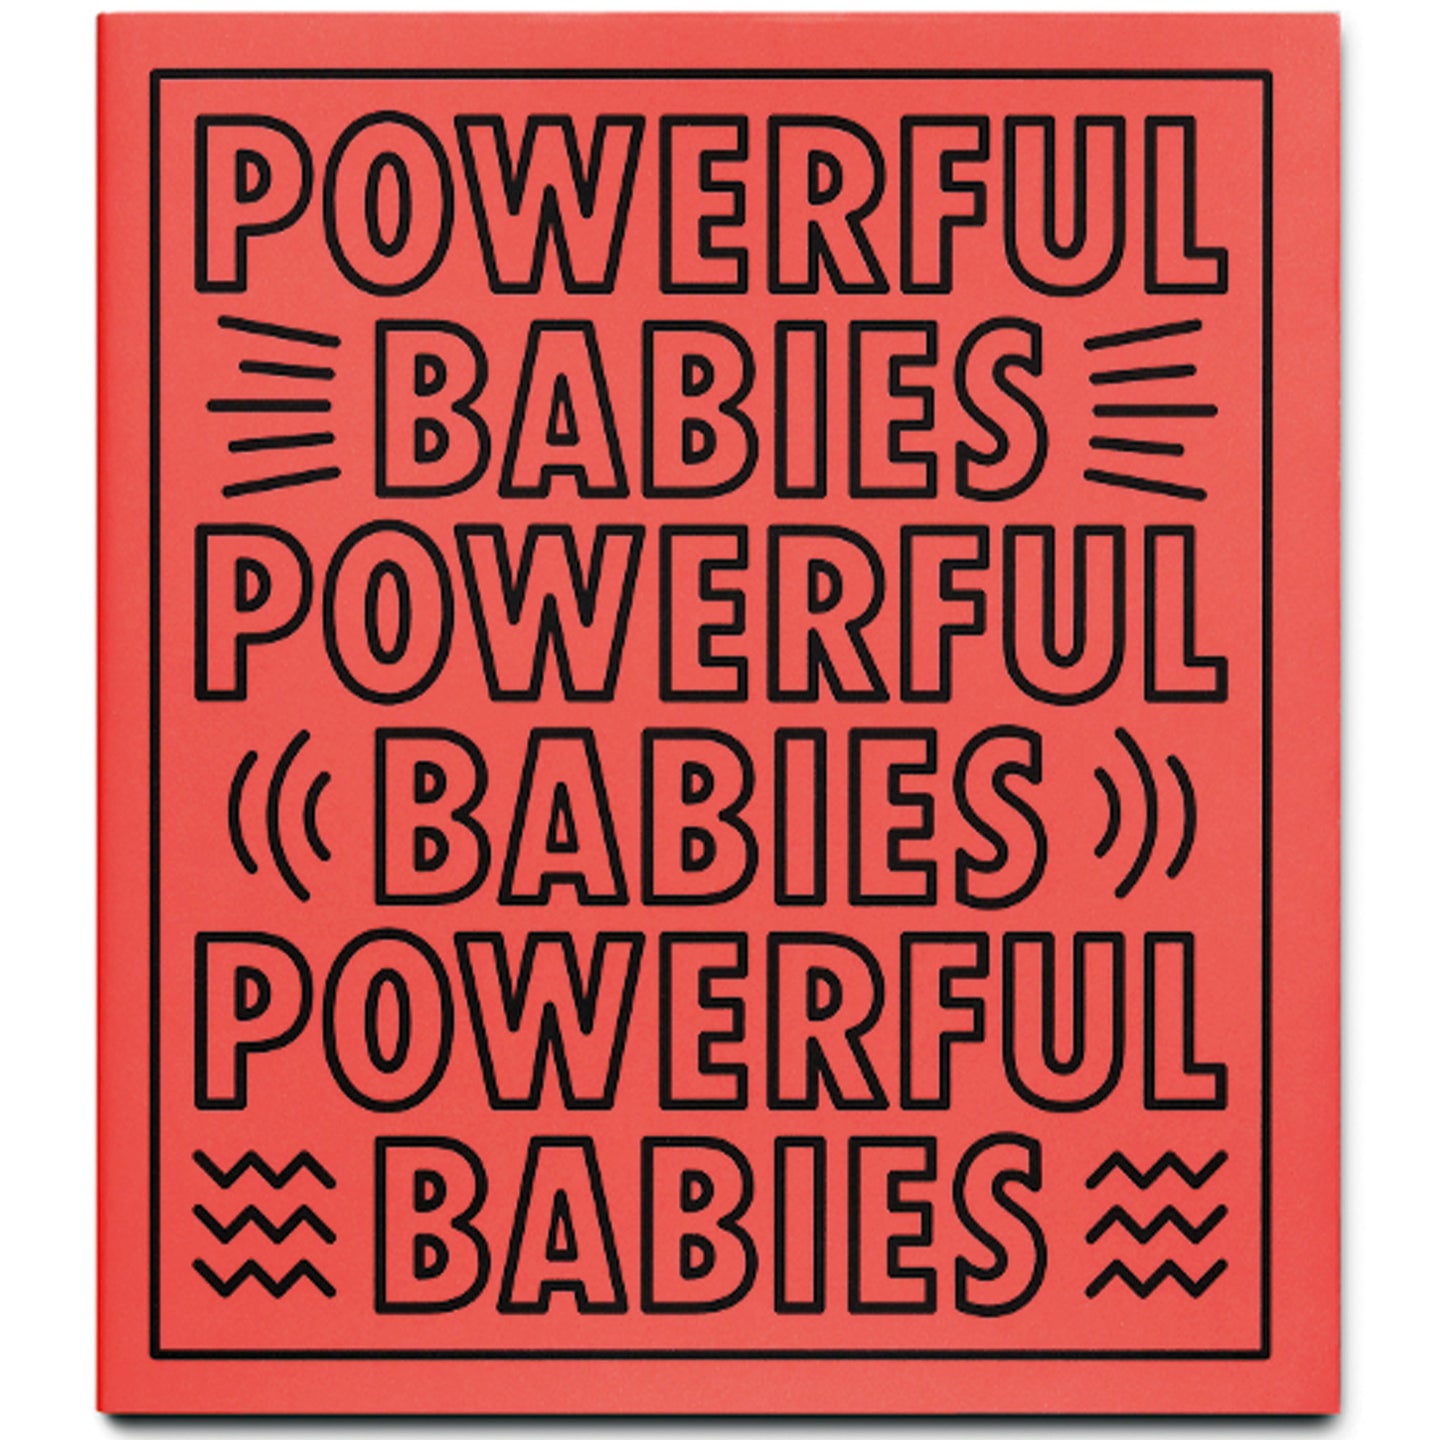 POWERFUL BABIES: KEITH HARING'S IMPACT ON ARTISTS TODAY